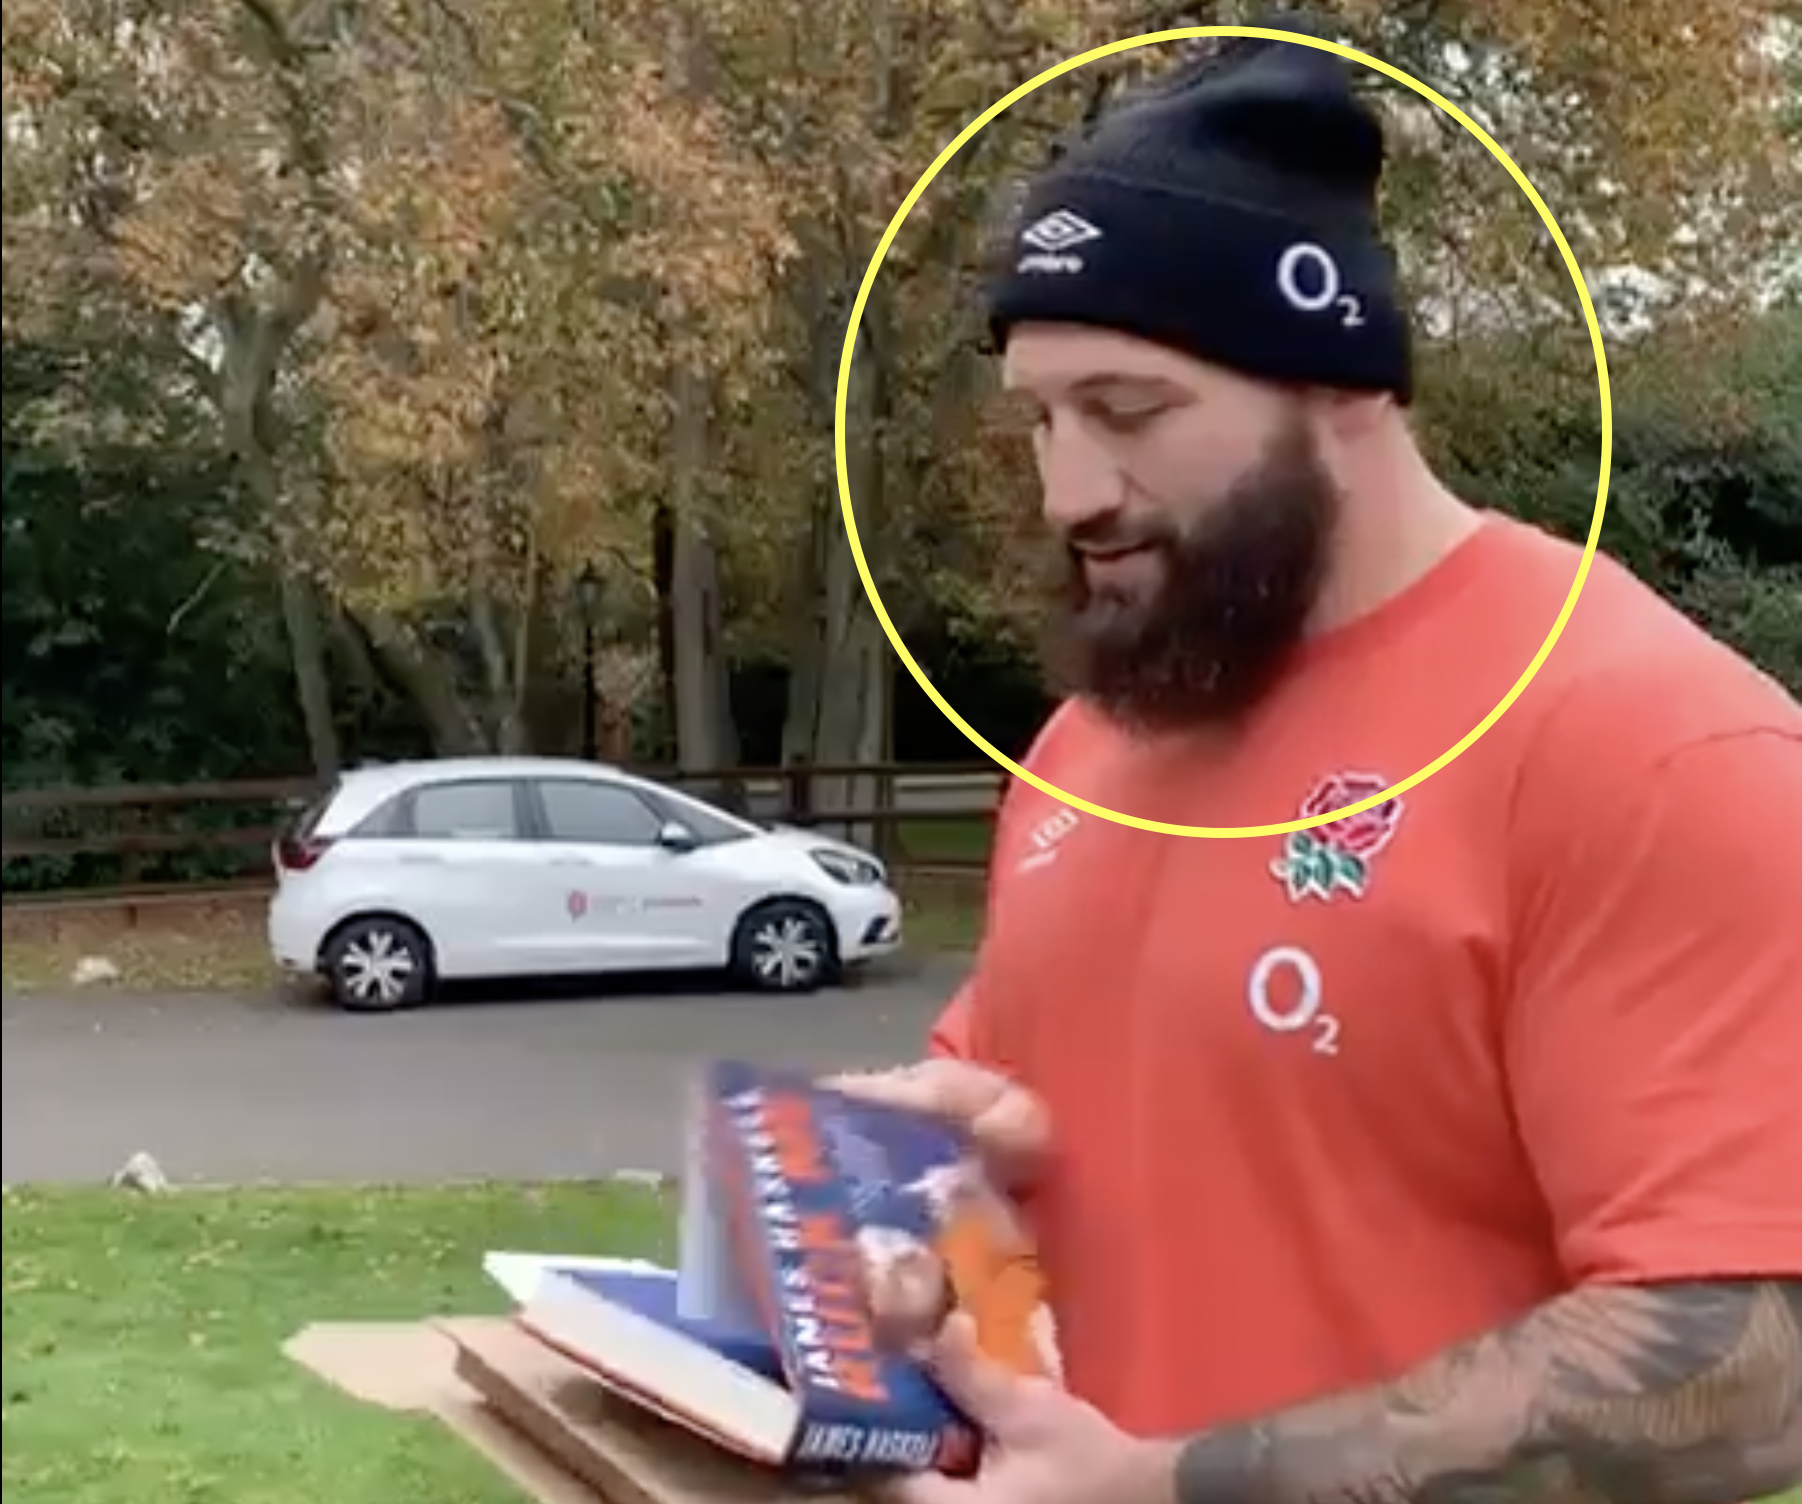 Joe Marler and James Haskell's book battle continues